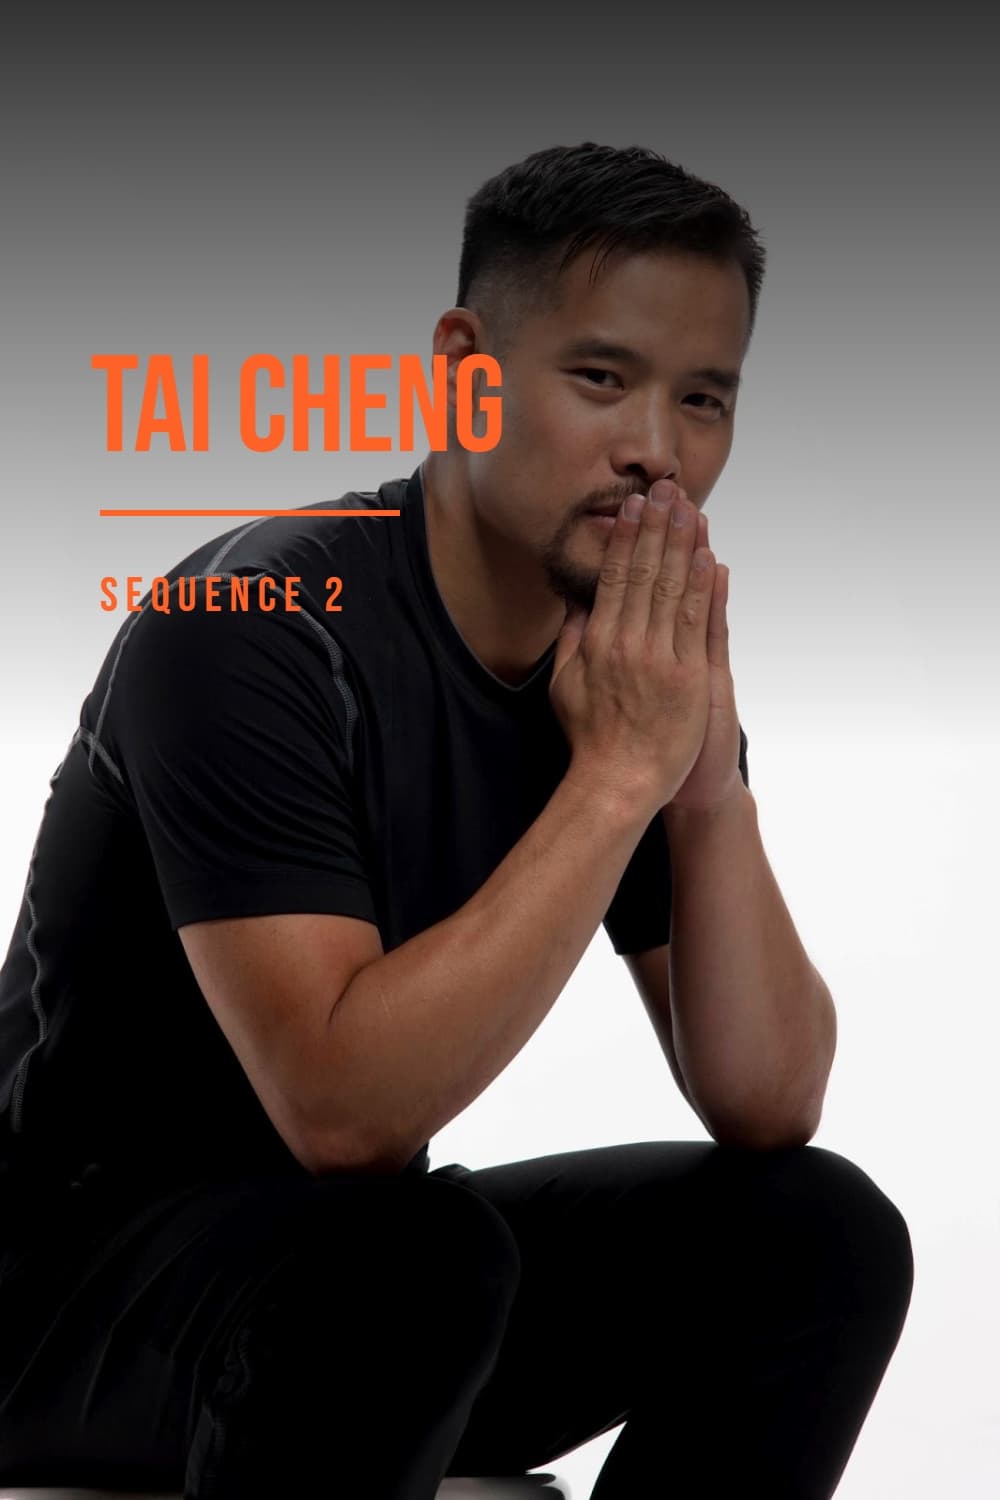 Tai Cheng - Sequence 2